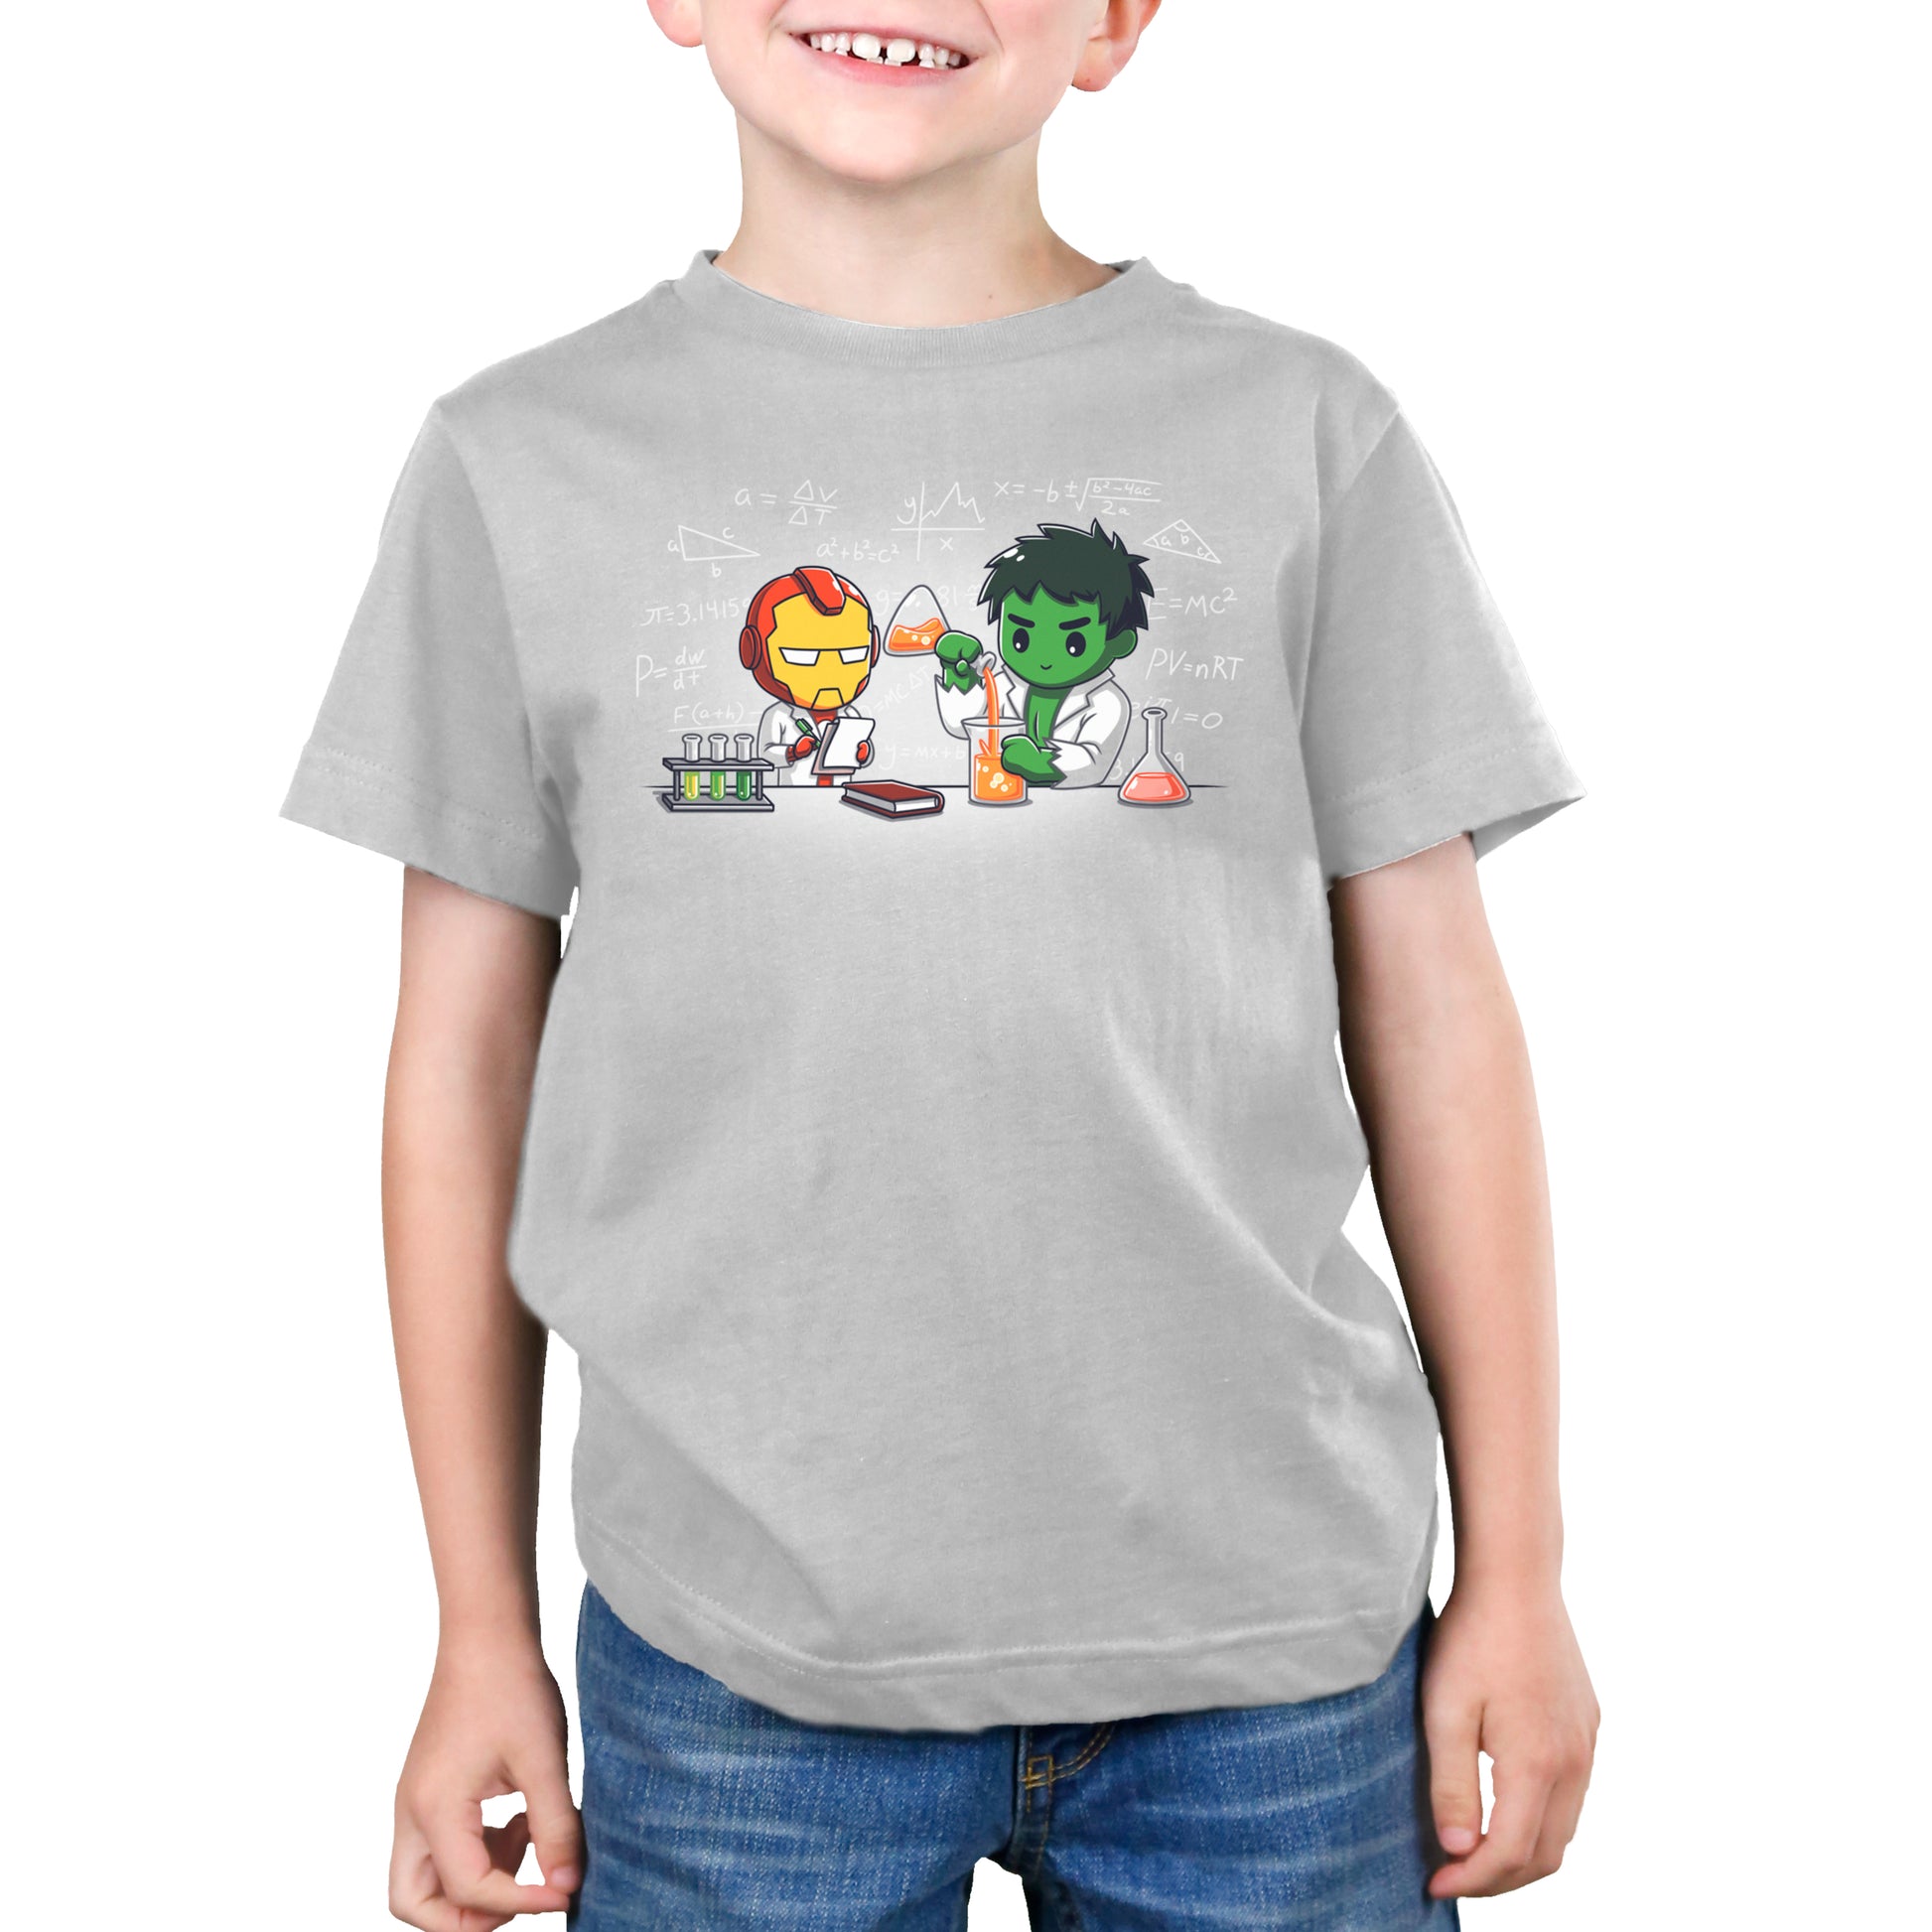 A young boy wearing a Marvel T-shirt with Iron Man and Hulk's Science Lab design.